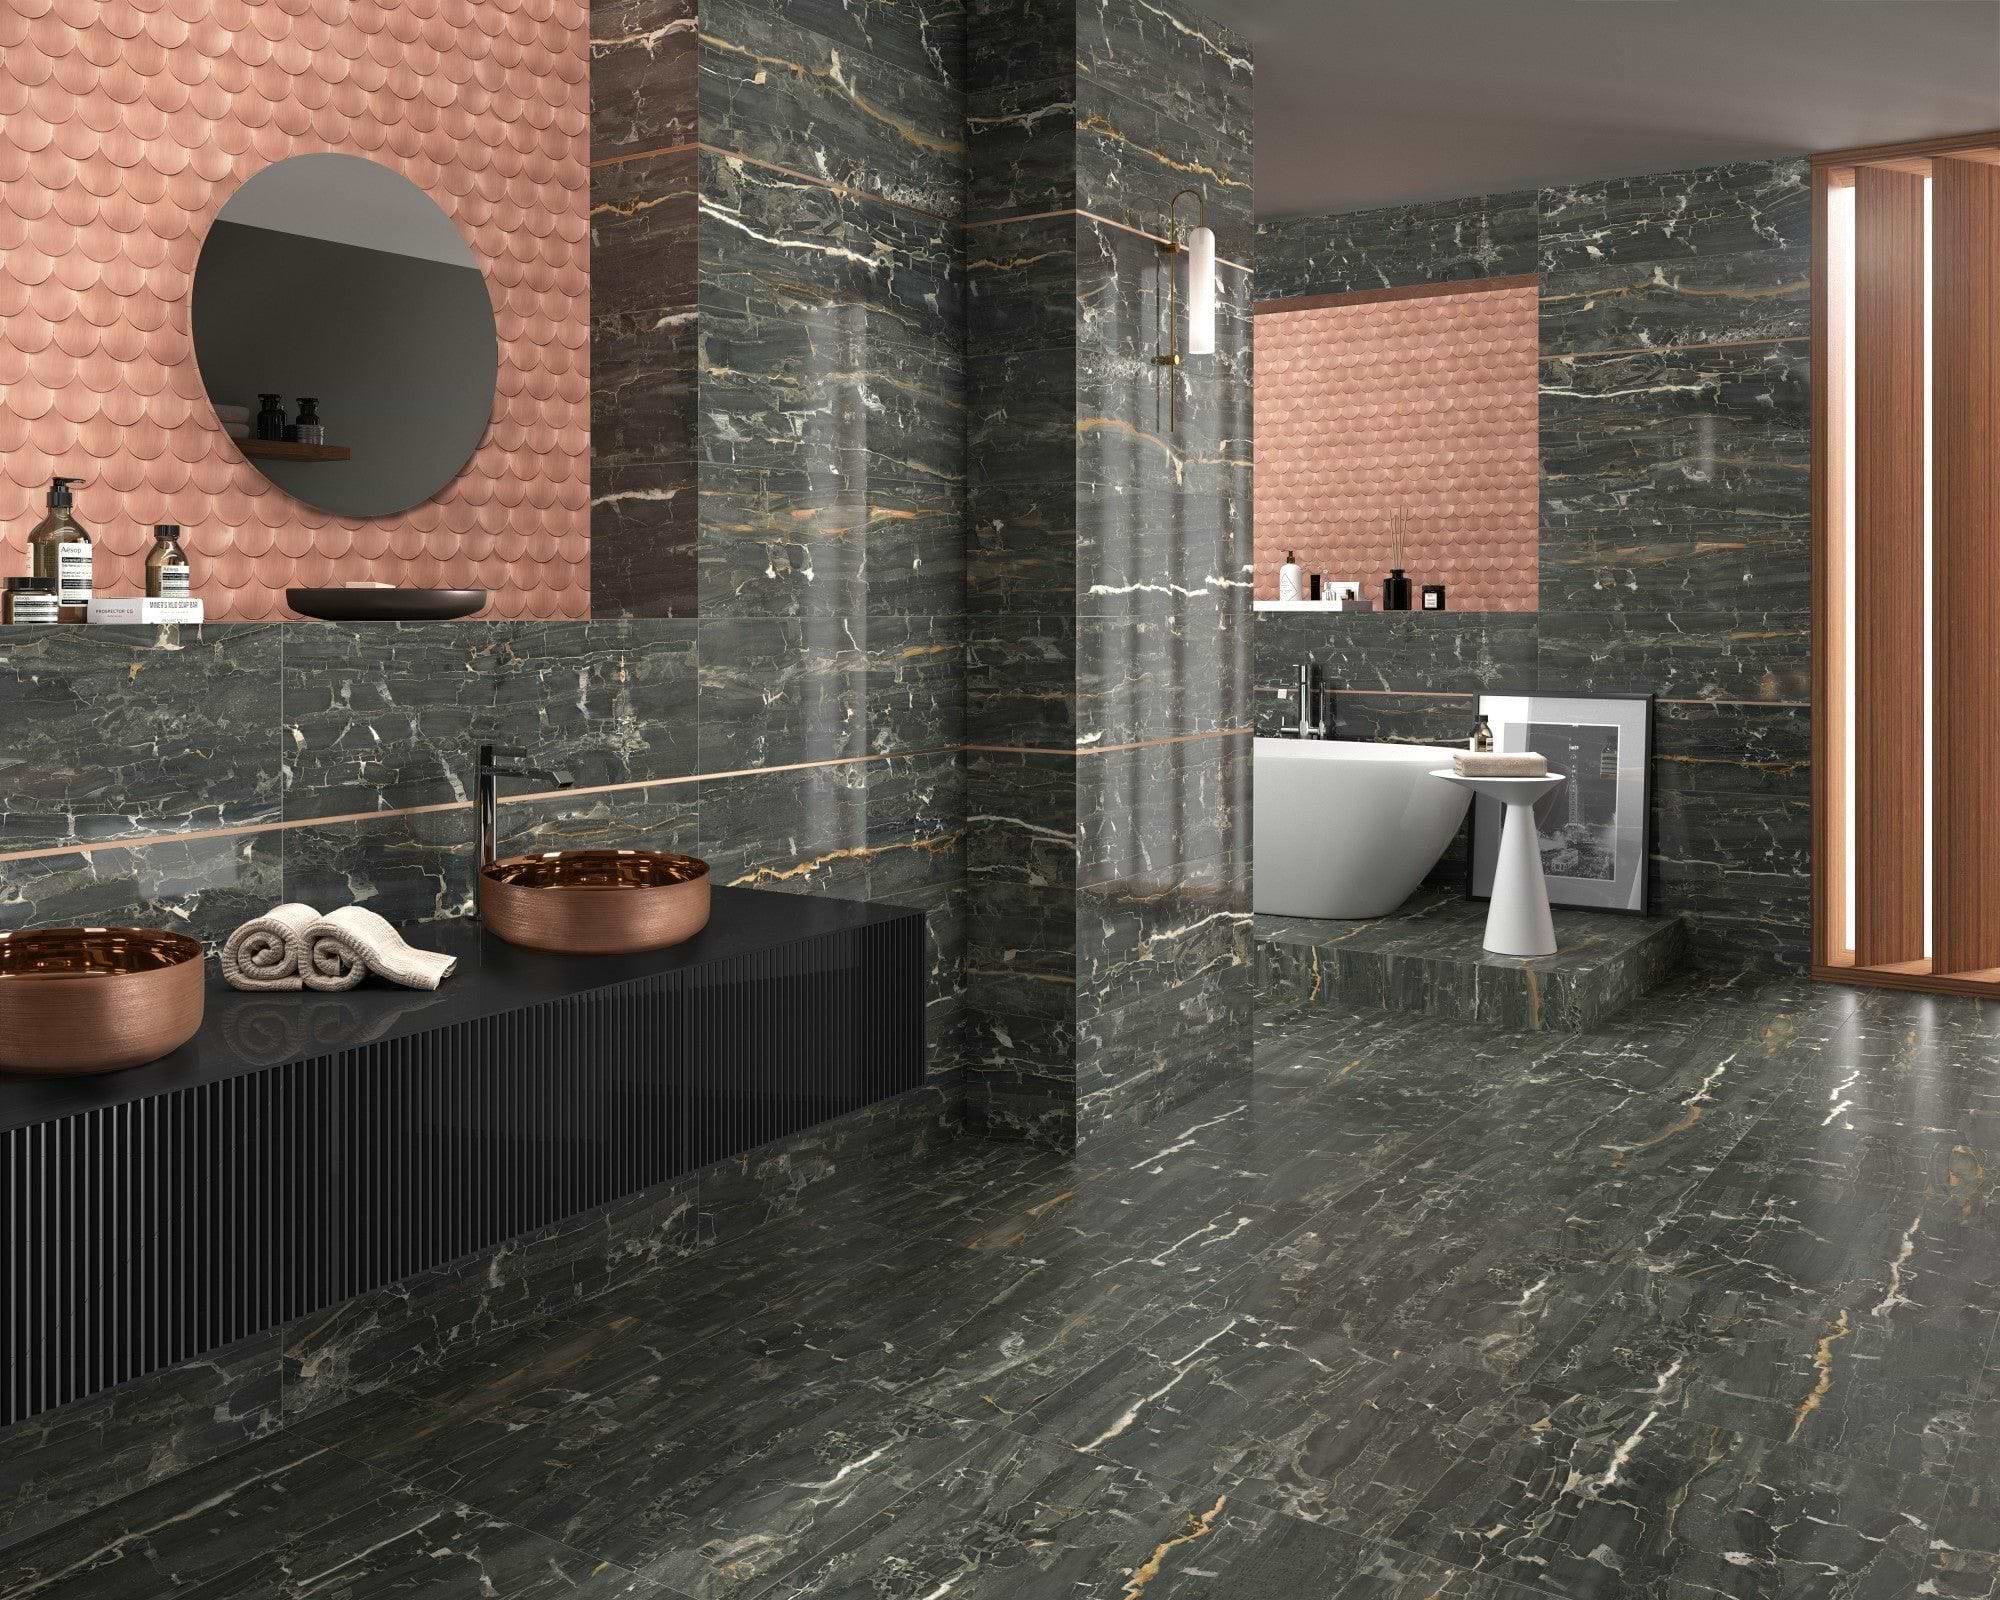 Hyperion Tiles All Products 36 x 36 x 12cm Lavabo Heller Rose Gold